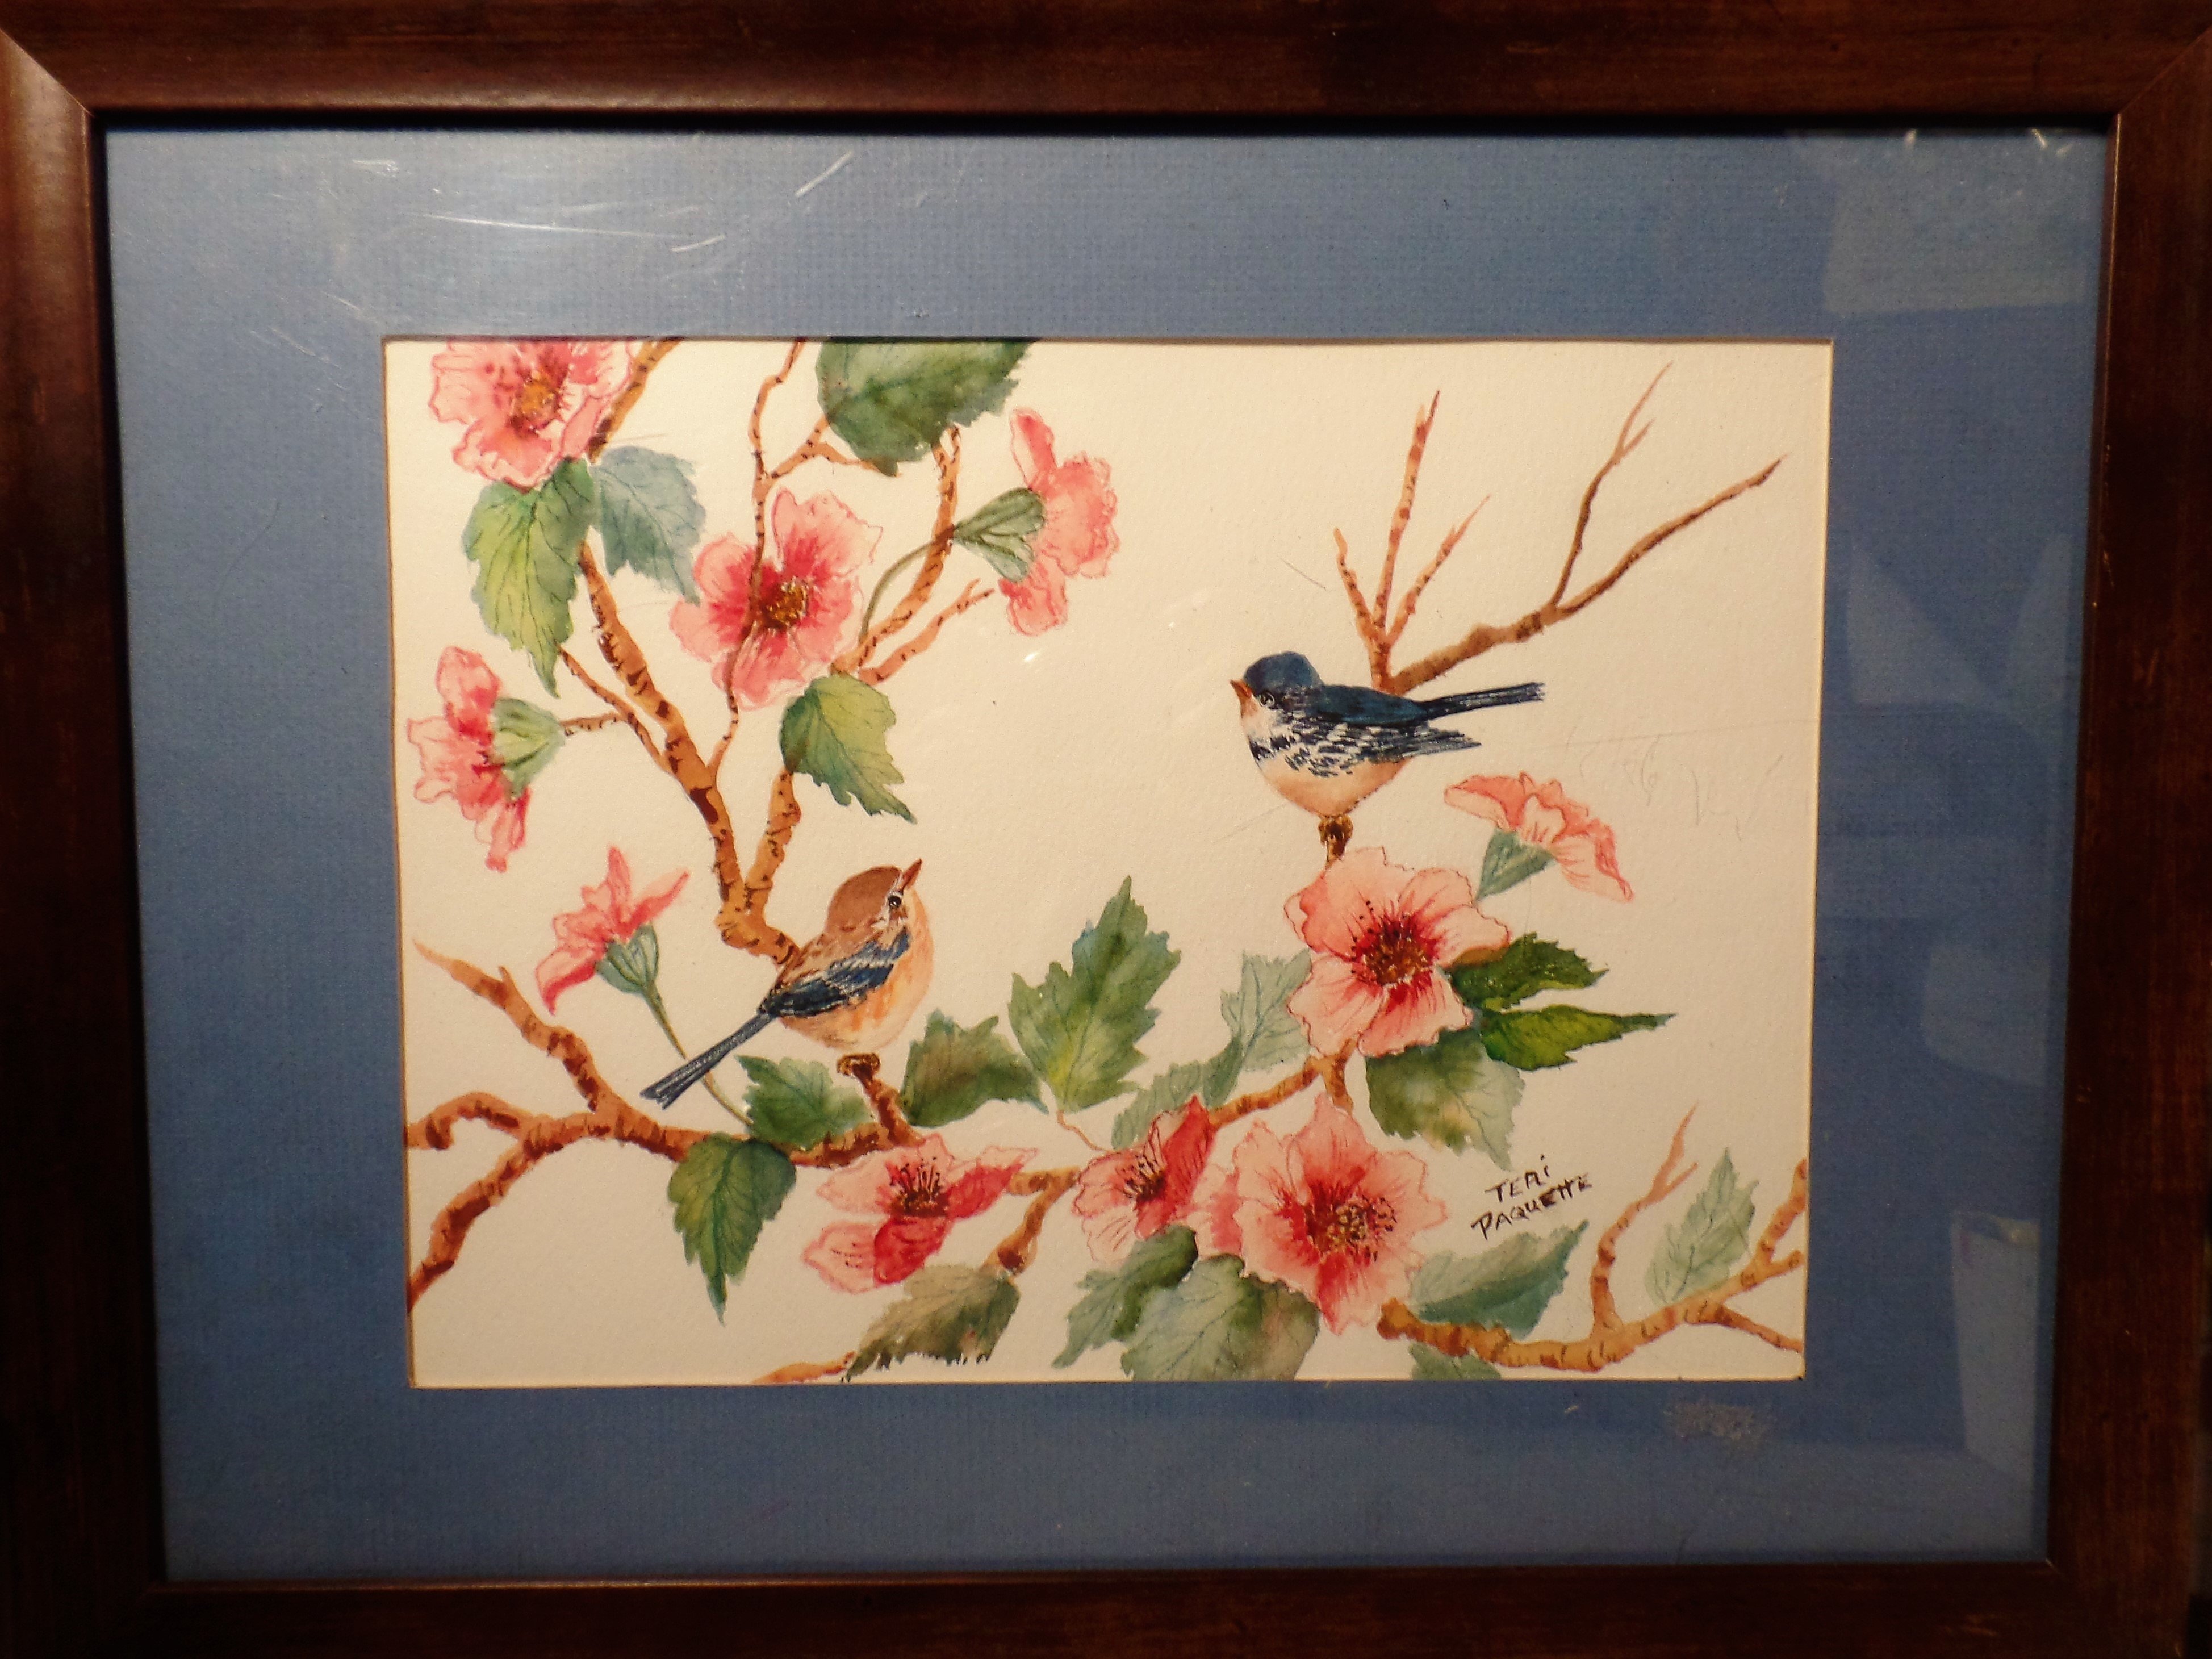 Teri Paquette: 'pair of bluebirds', 2019 Watercolor, Birds. ORIGINAL WATERCOLOR- MAT- FRAMED- UNDER GLASS- TWO BLUEBIRDS IN TREE- SIGNED...